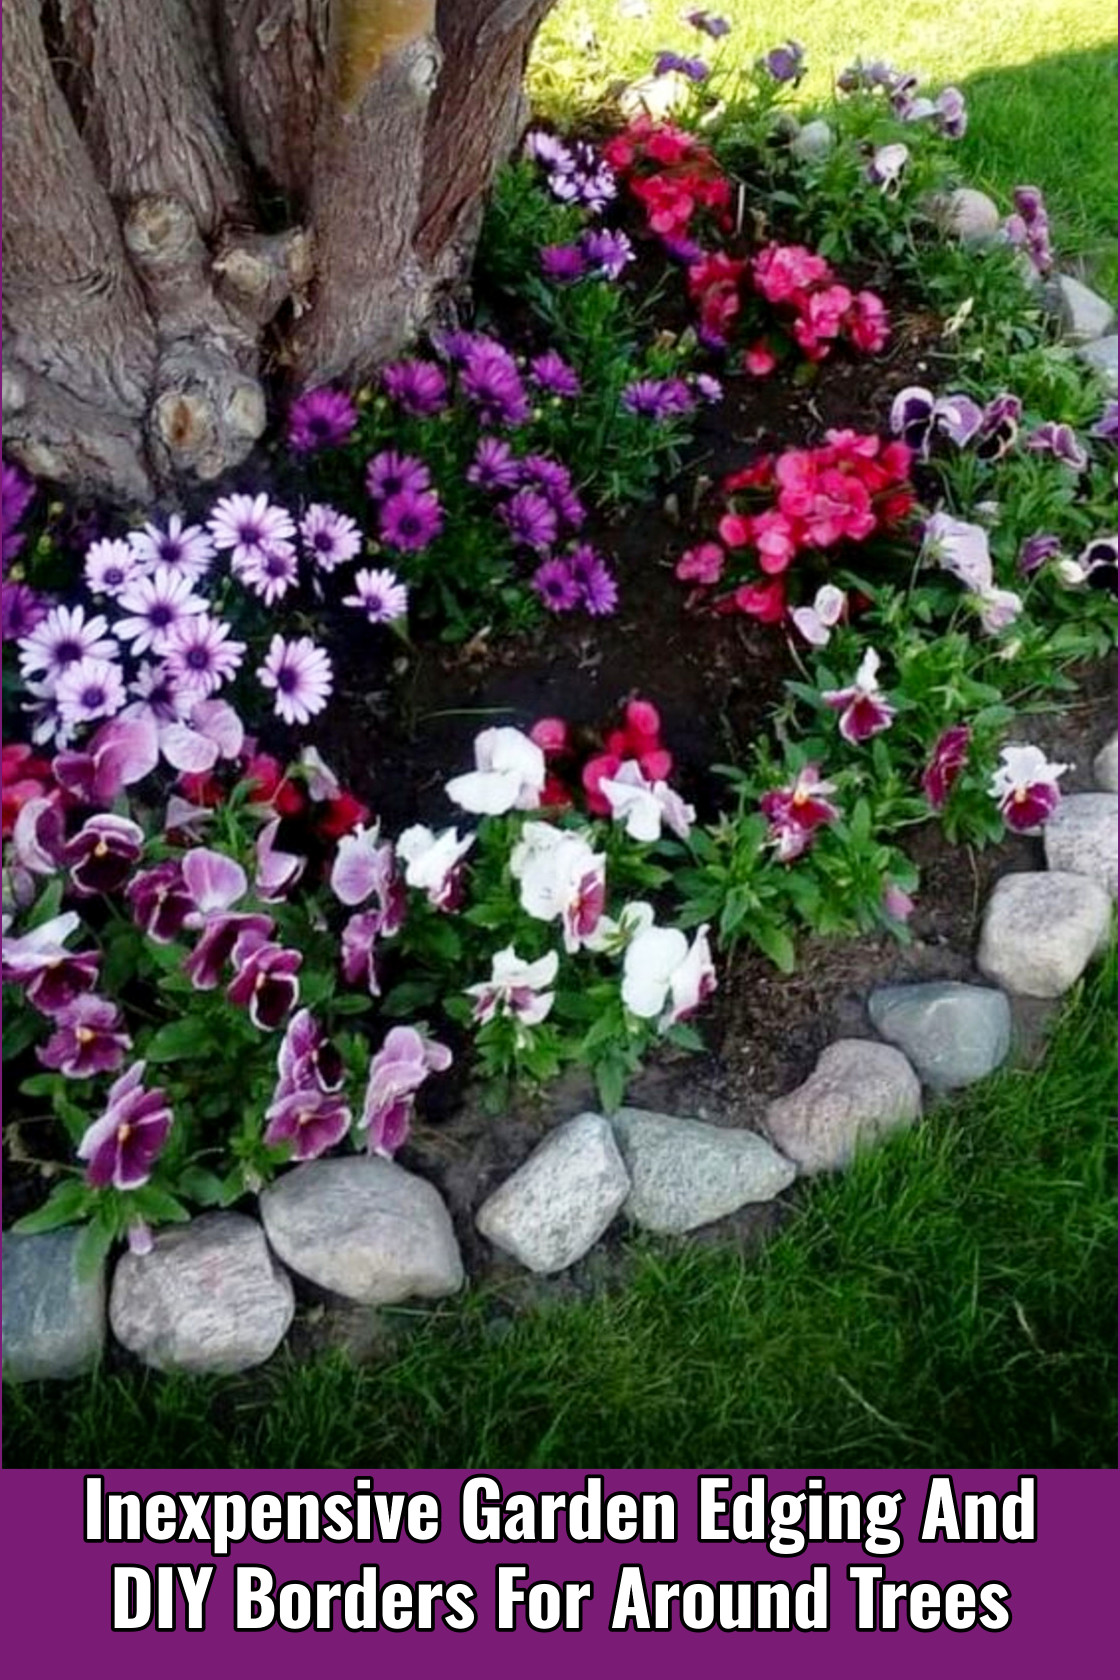 Inexpensive Garden Edging And DIY Borders For Around Trees and Stumps In Your Yard